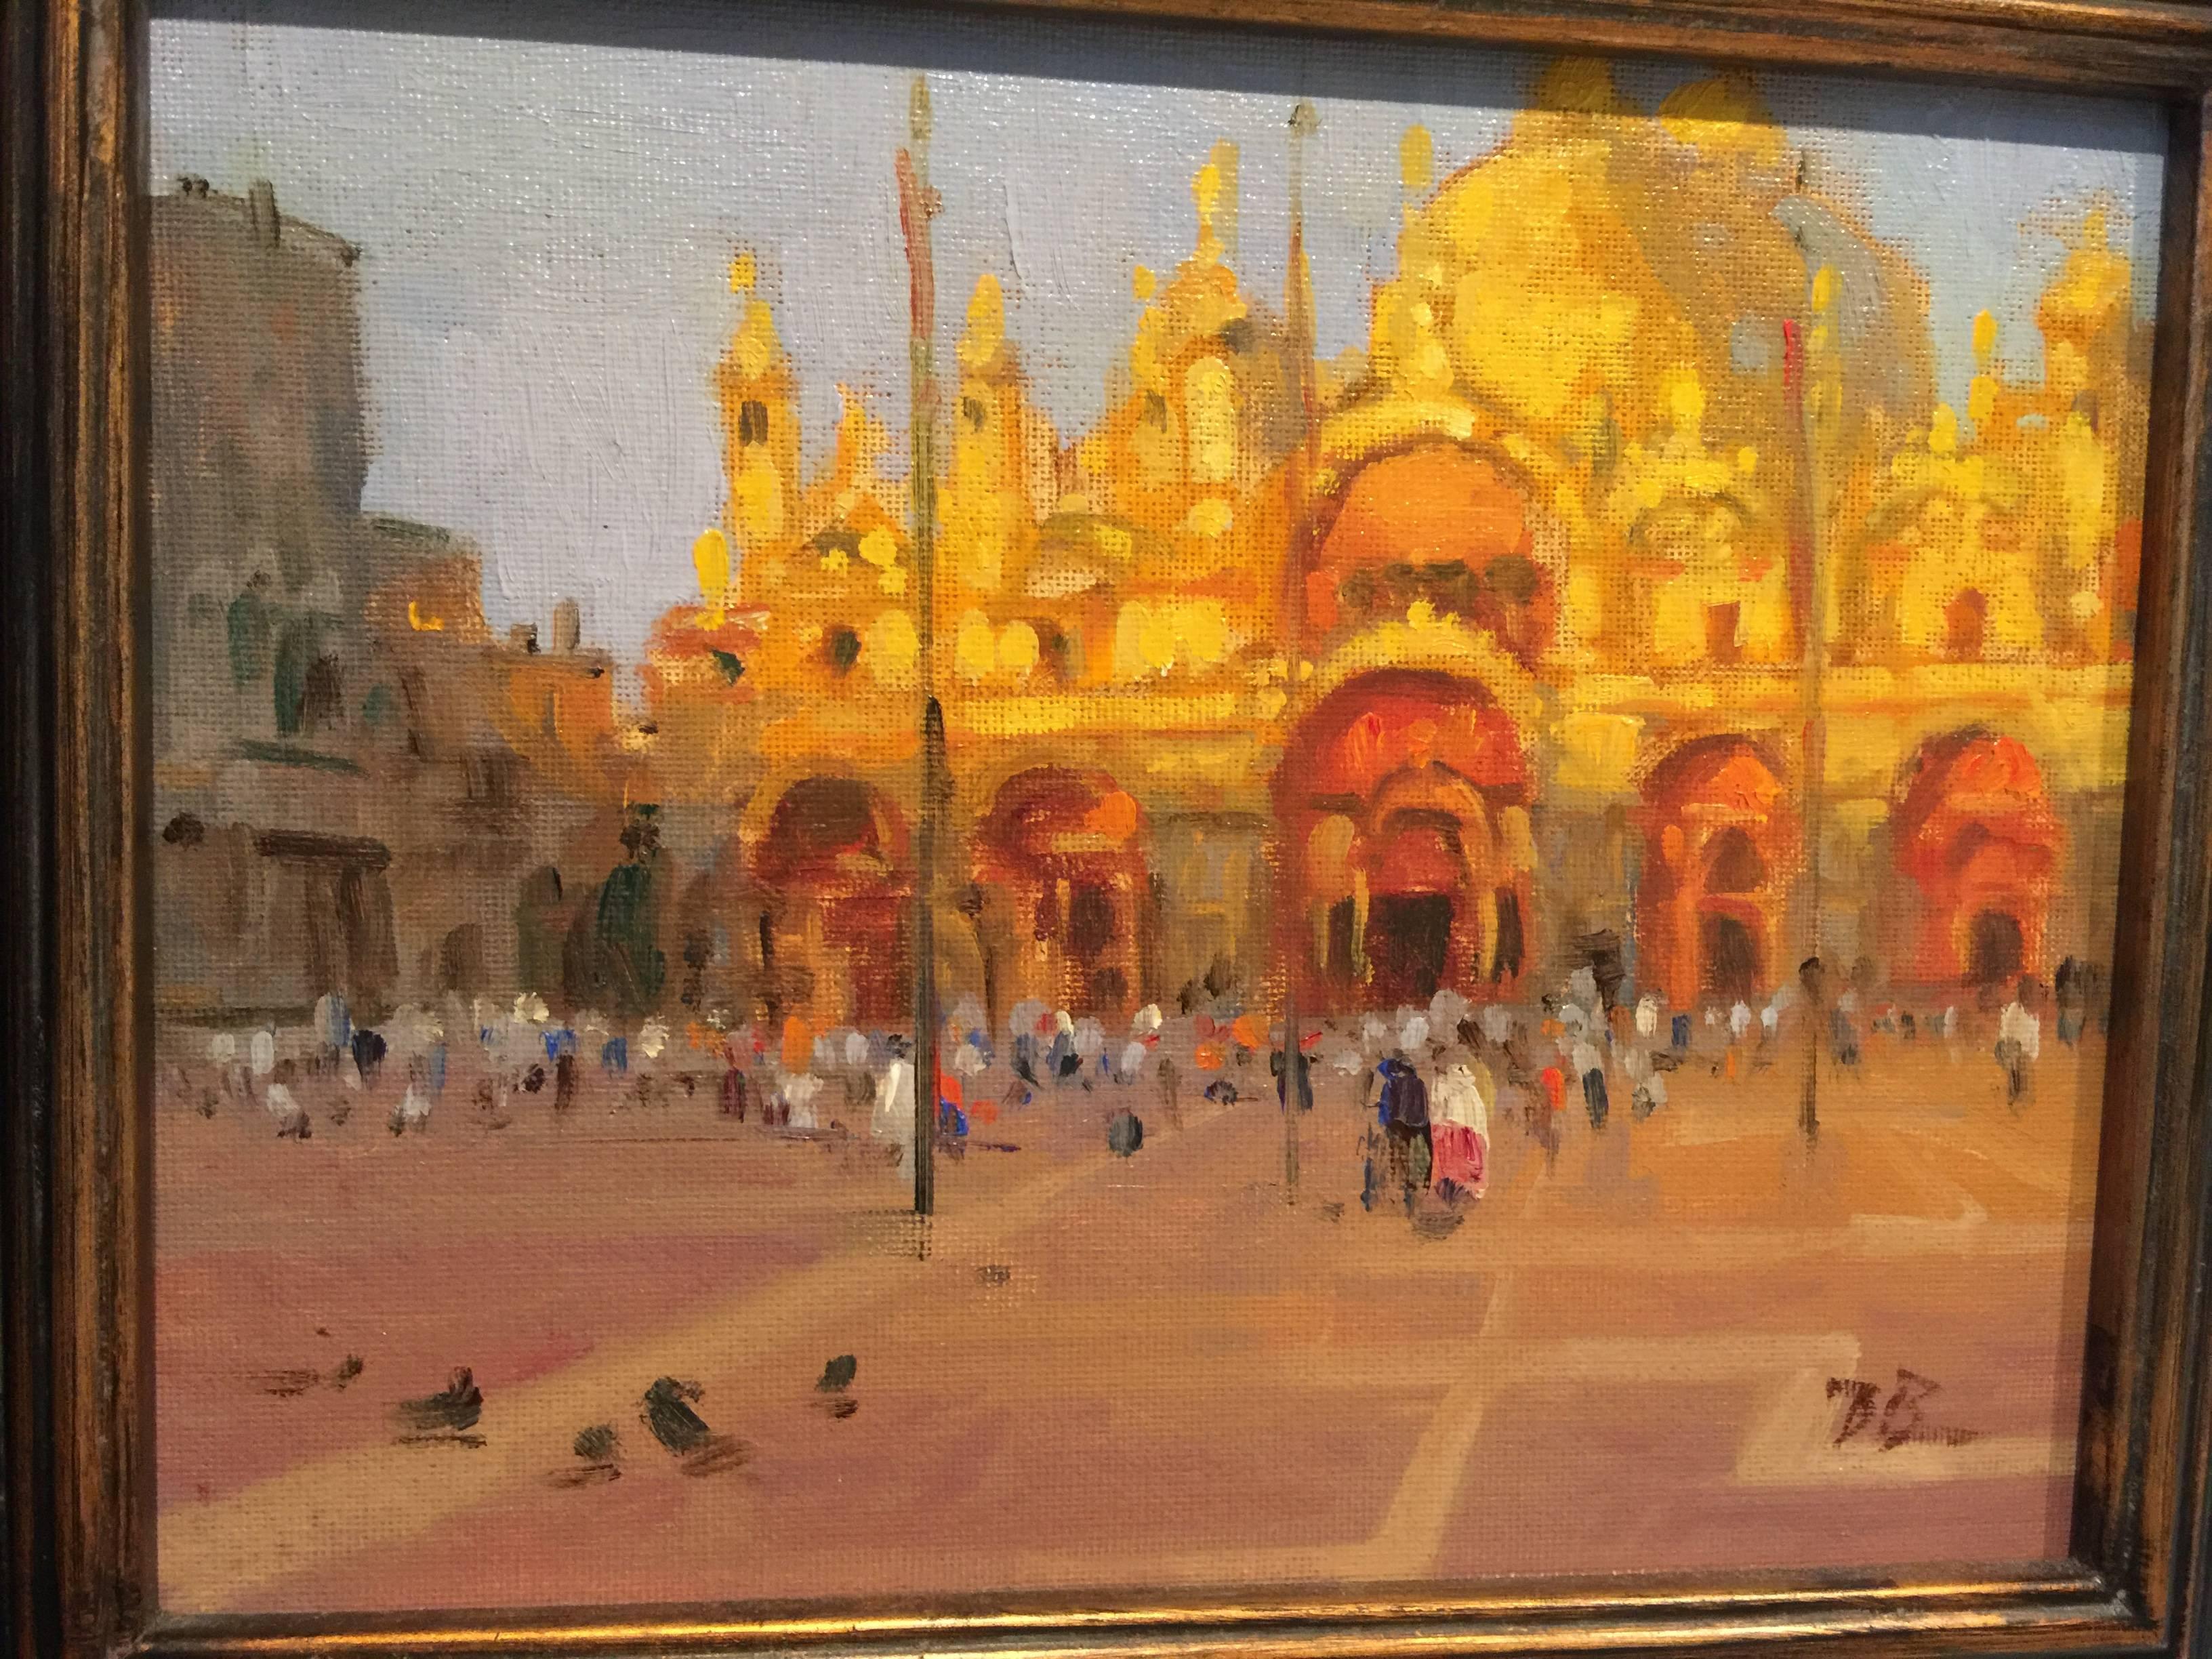 This painting was painted in 2013 and is called San Marco Venice

Brian blood

California Impressionist

Brian Blood, a resident of Pebble Beach, California, is widely recognized as one of California’s most important plein air impressionist